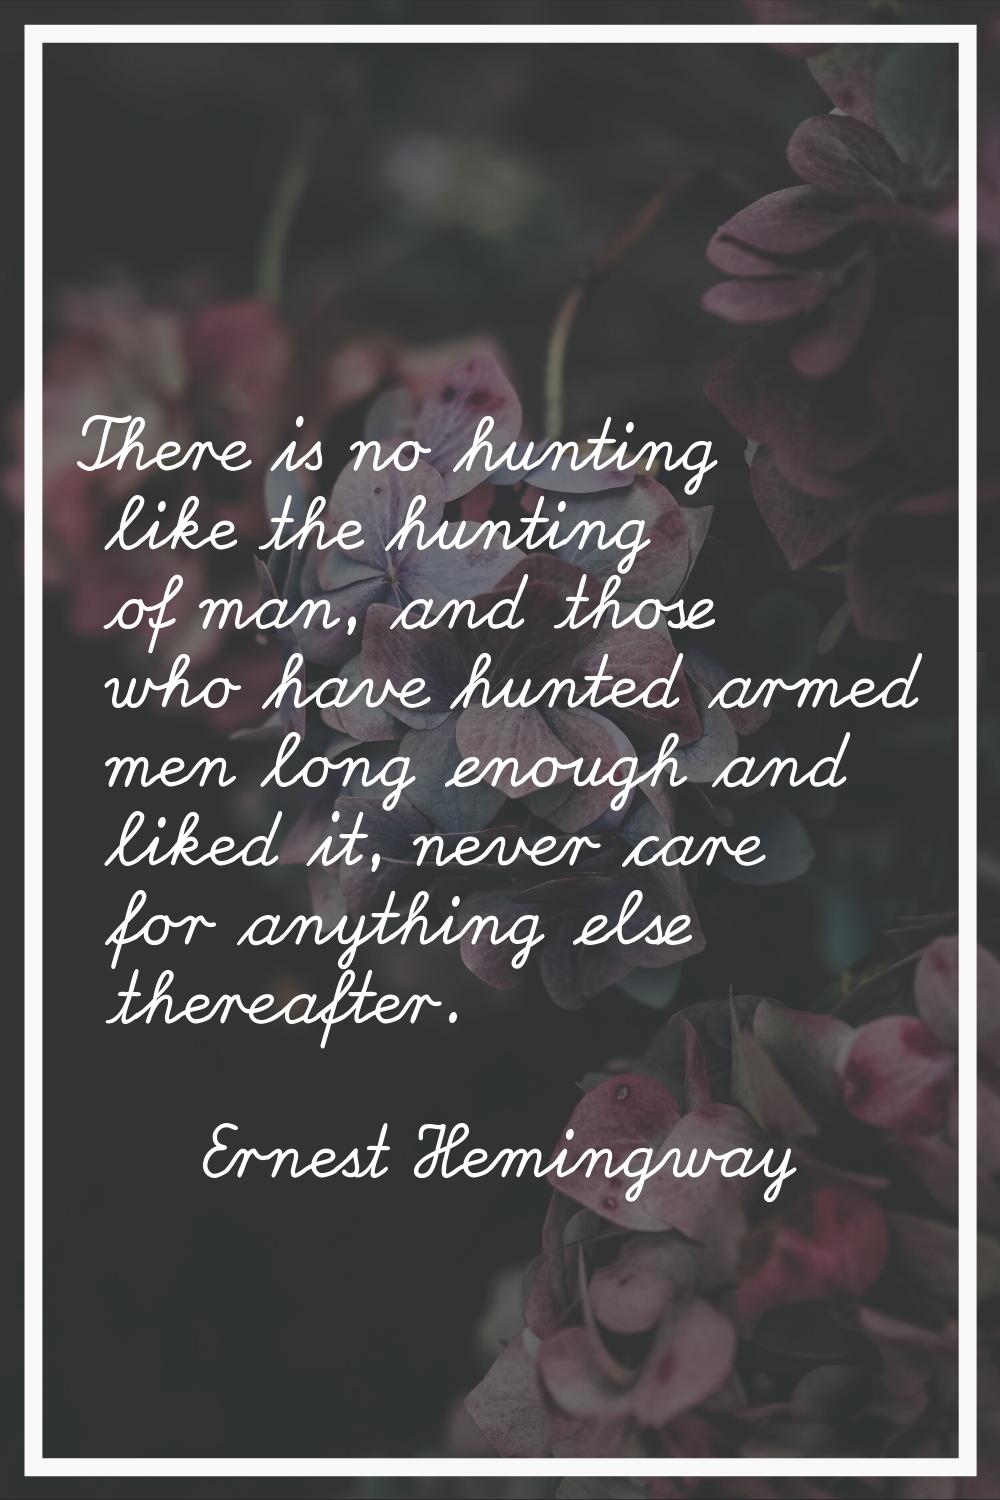 There is no hunting like the hunting of man, and those who have hunted armed men long enough and li